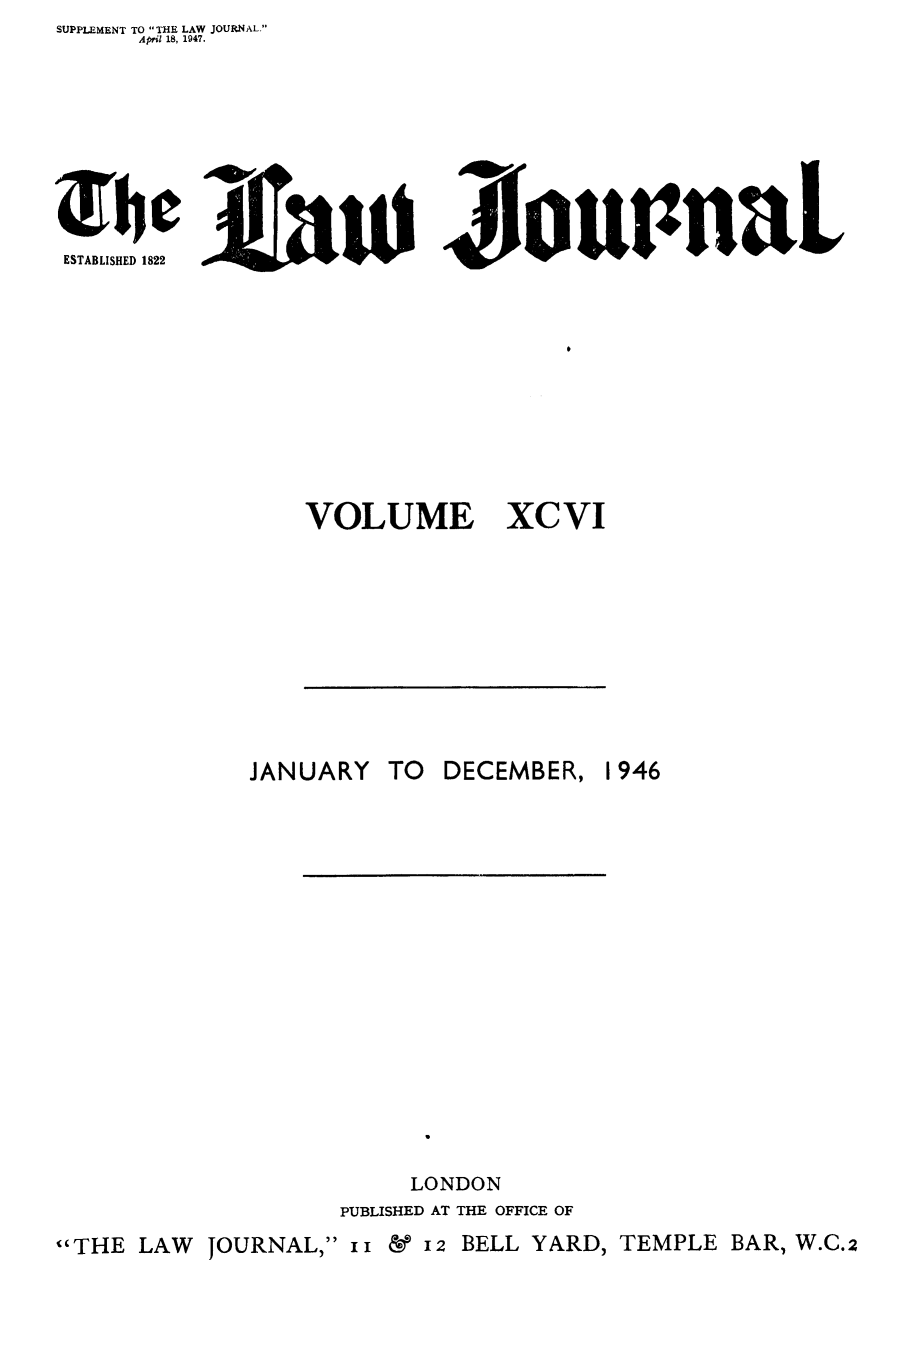 handle is hein.journals/lwjrnal96 and id is 1 raw text is: SUPPLEMENT TO THE LAW JOURNAL.
     April 18, 1947.







bc fau JovupnaL
ESTABLISHED 1822


VOLUME


XCVI


            JANUARY TO DECEMBER, 1946

















                      LONDON
                  PUBLISHED AT THE OFFICE OF
THE LAW JOURNAL, II  12 BELL YARD, TEMPLE BAR, W.C.2


